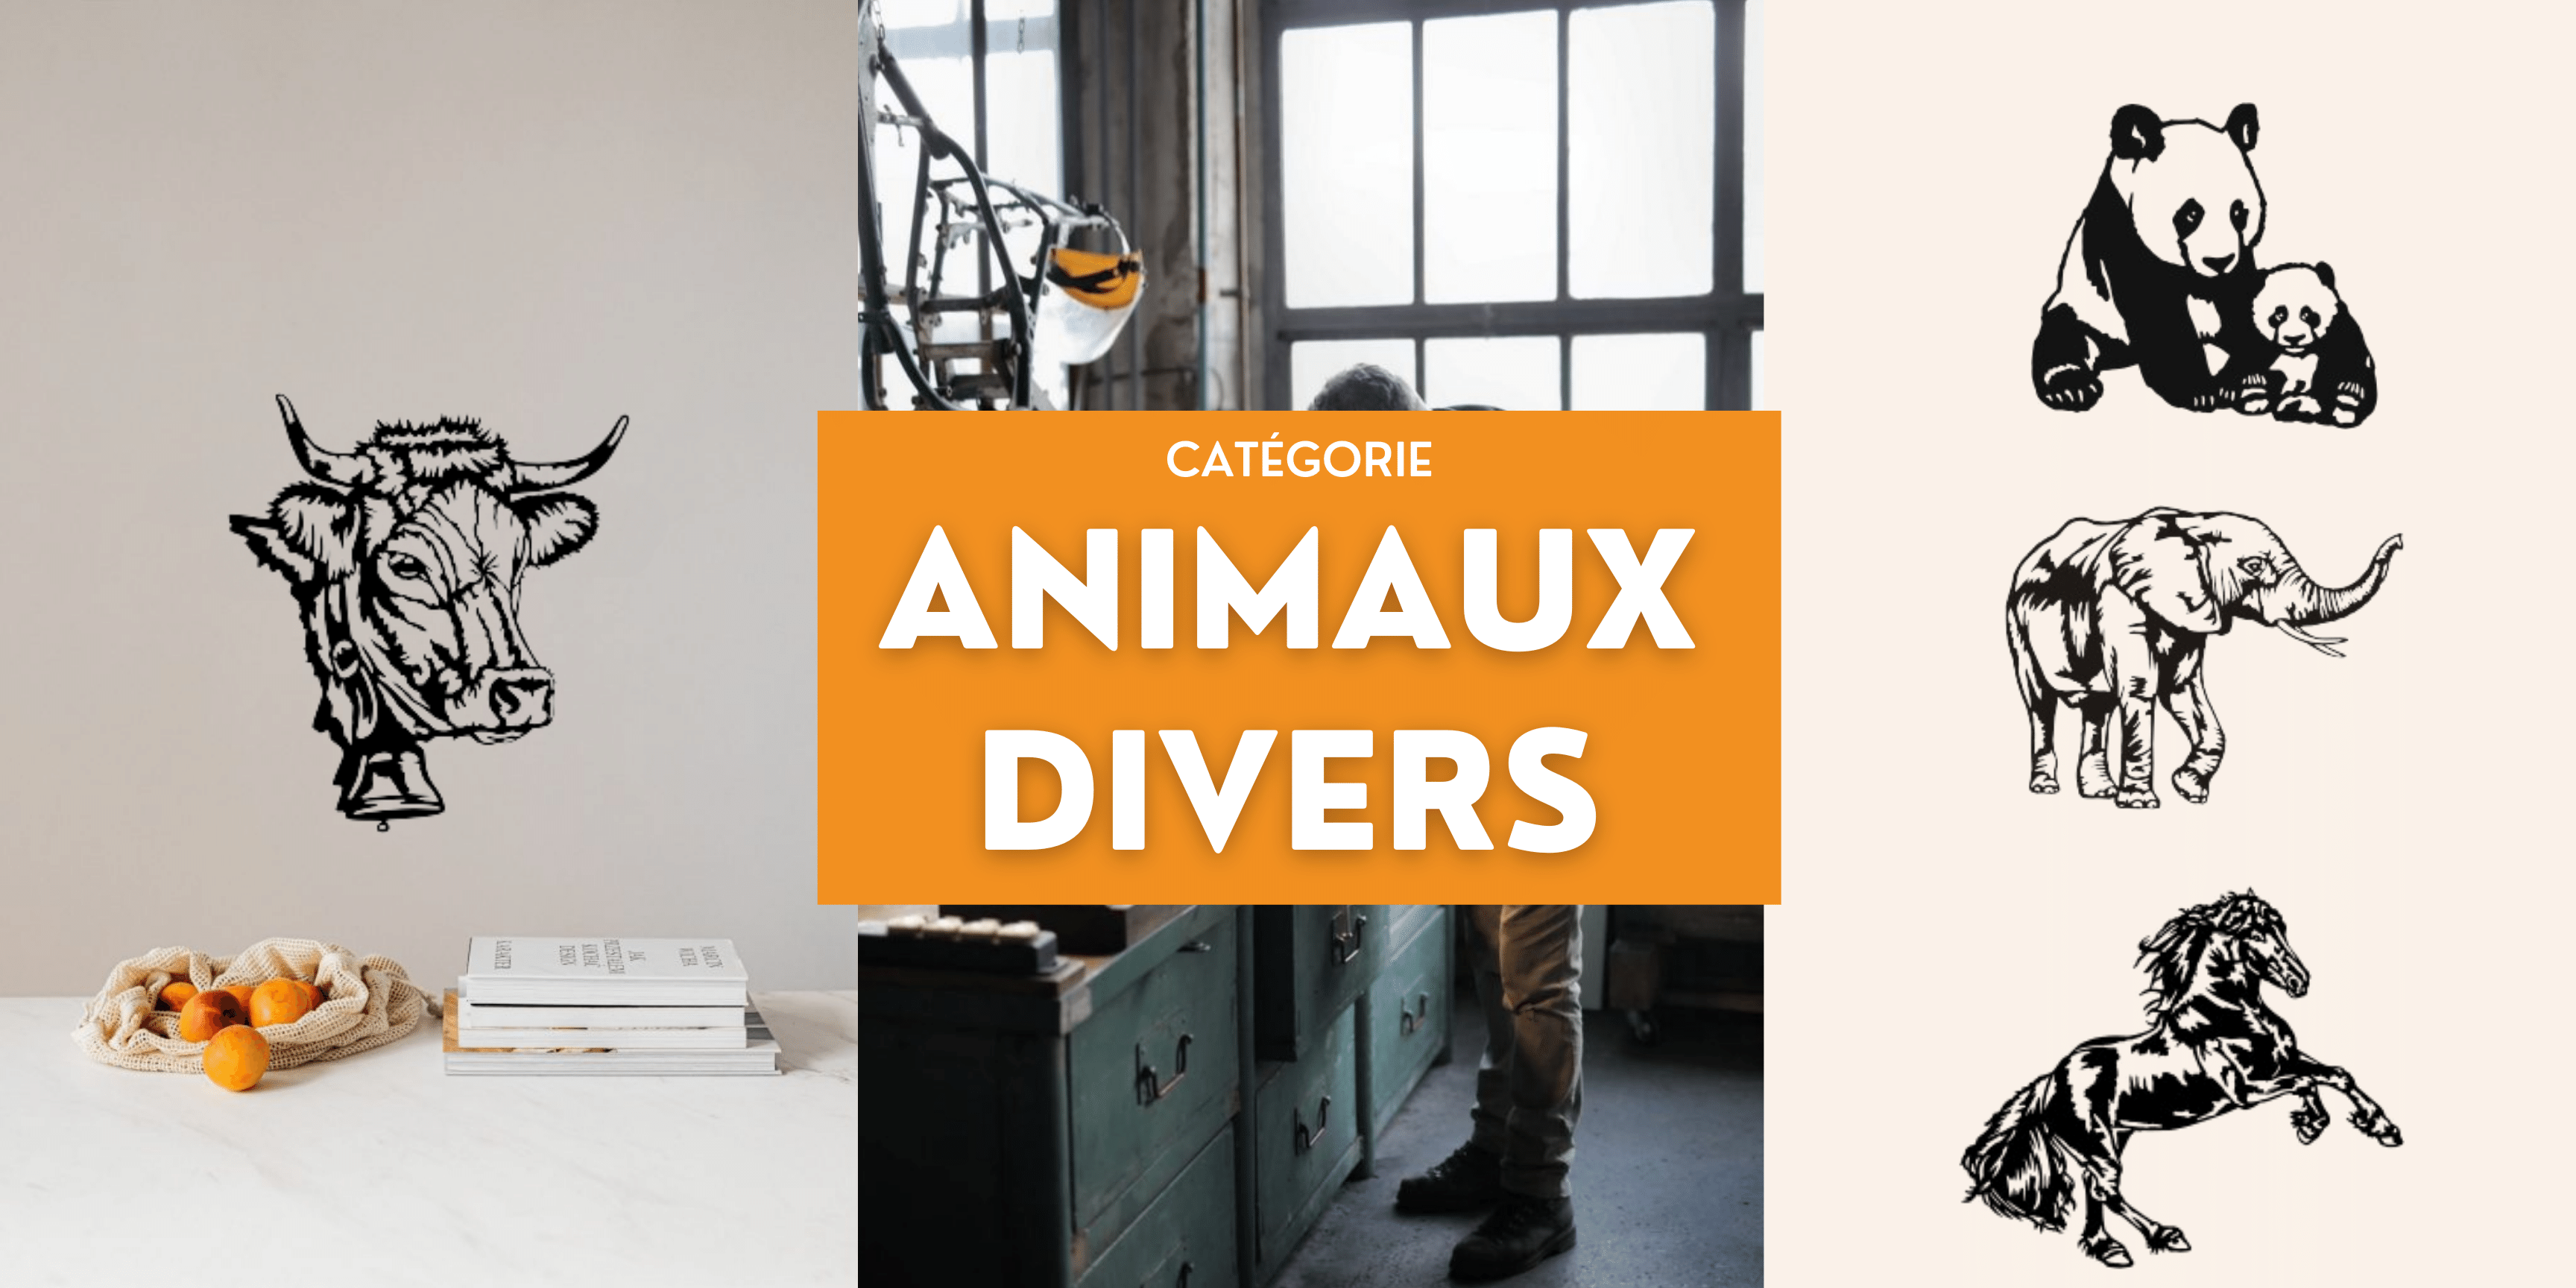 Animaux divers